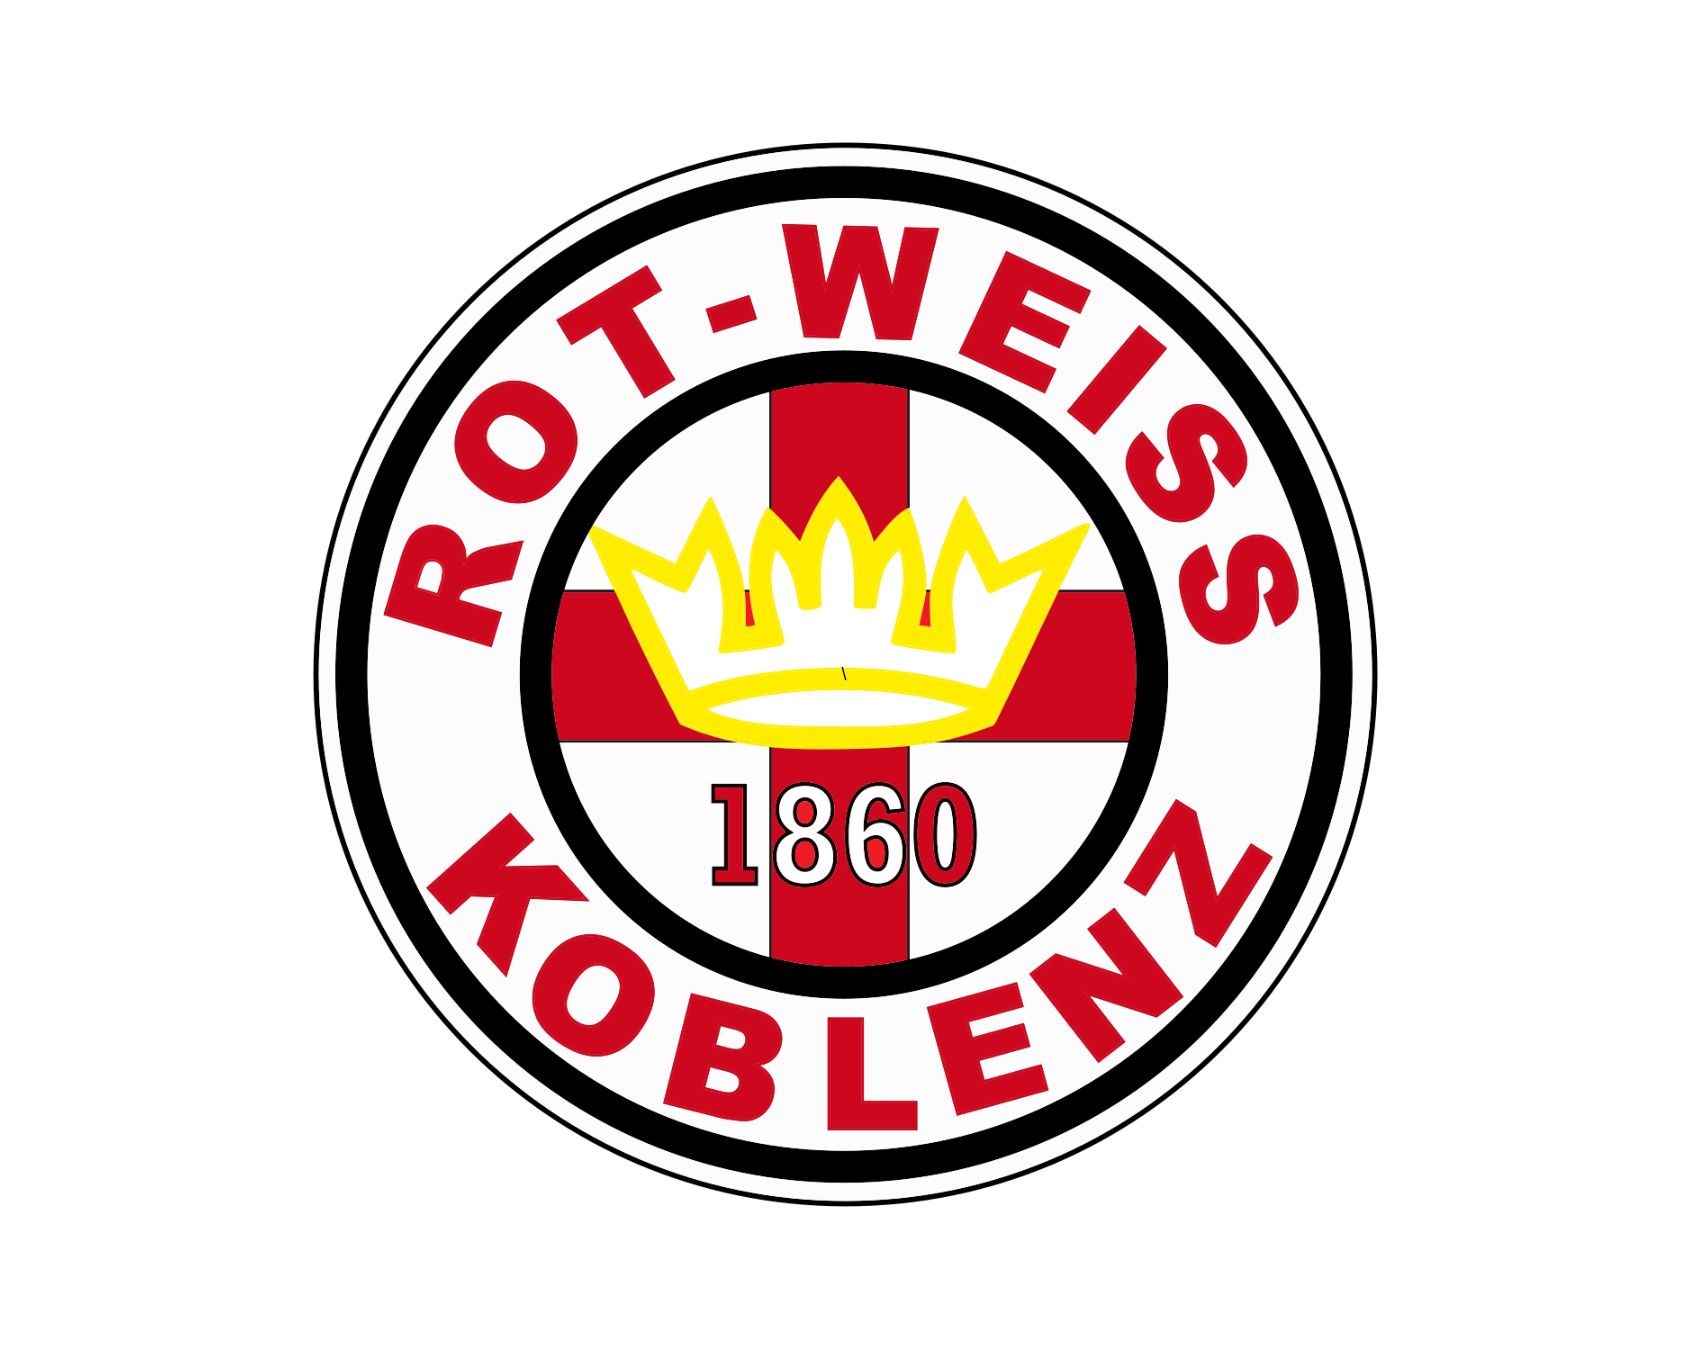 tus-rot-weis-koblenz-21-football-club-facts